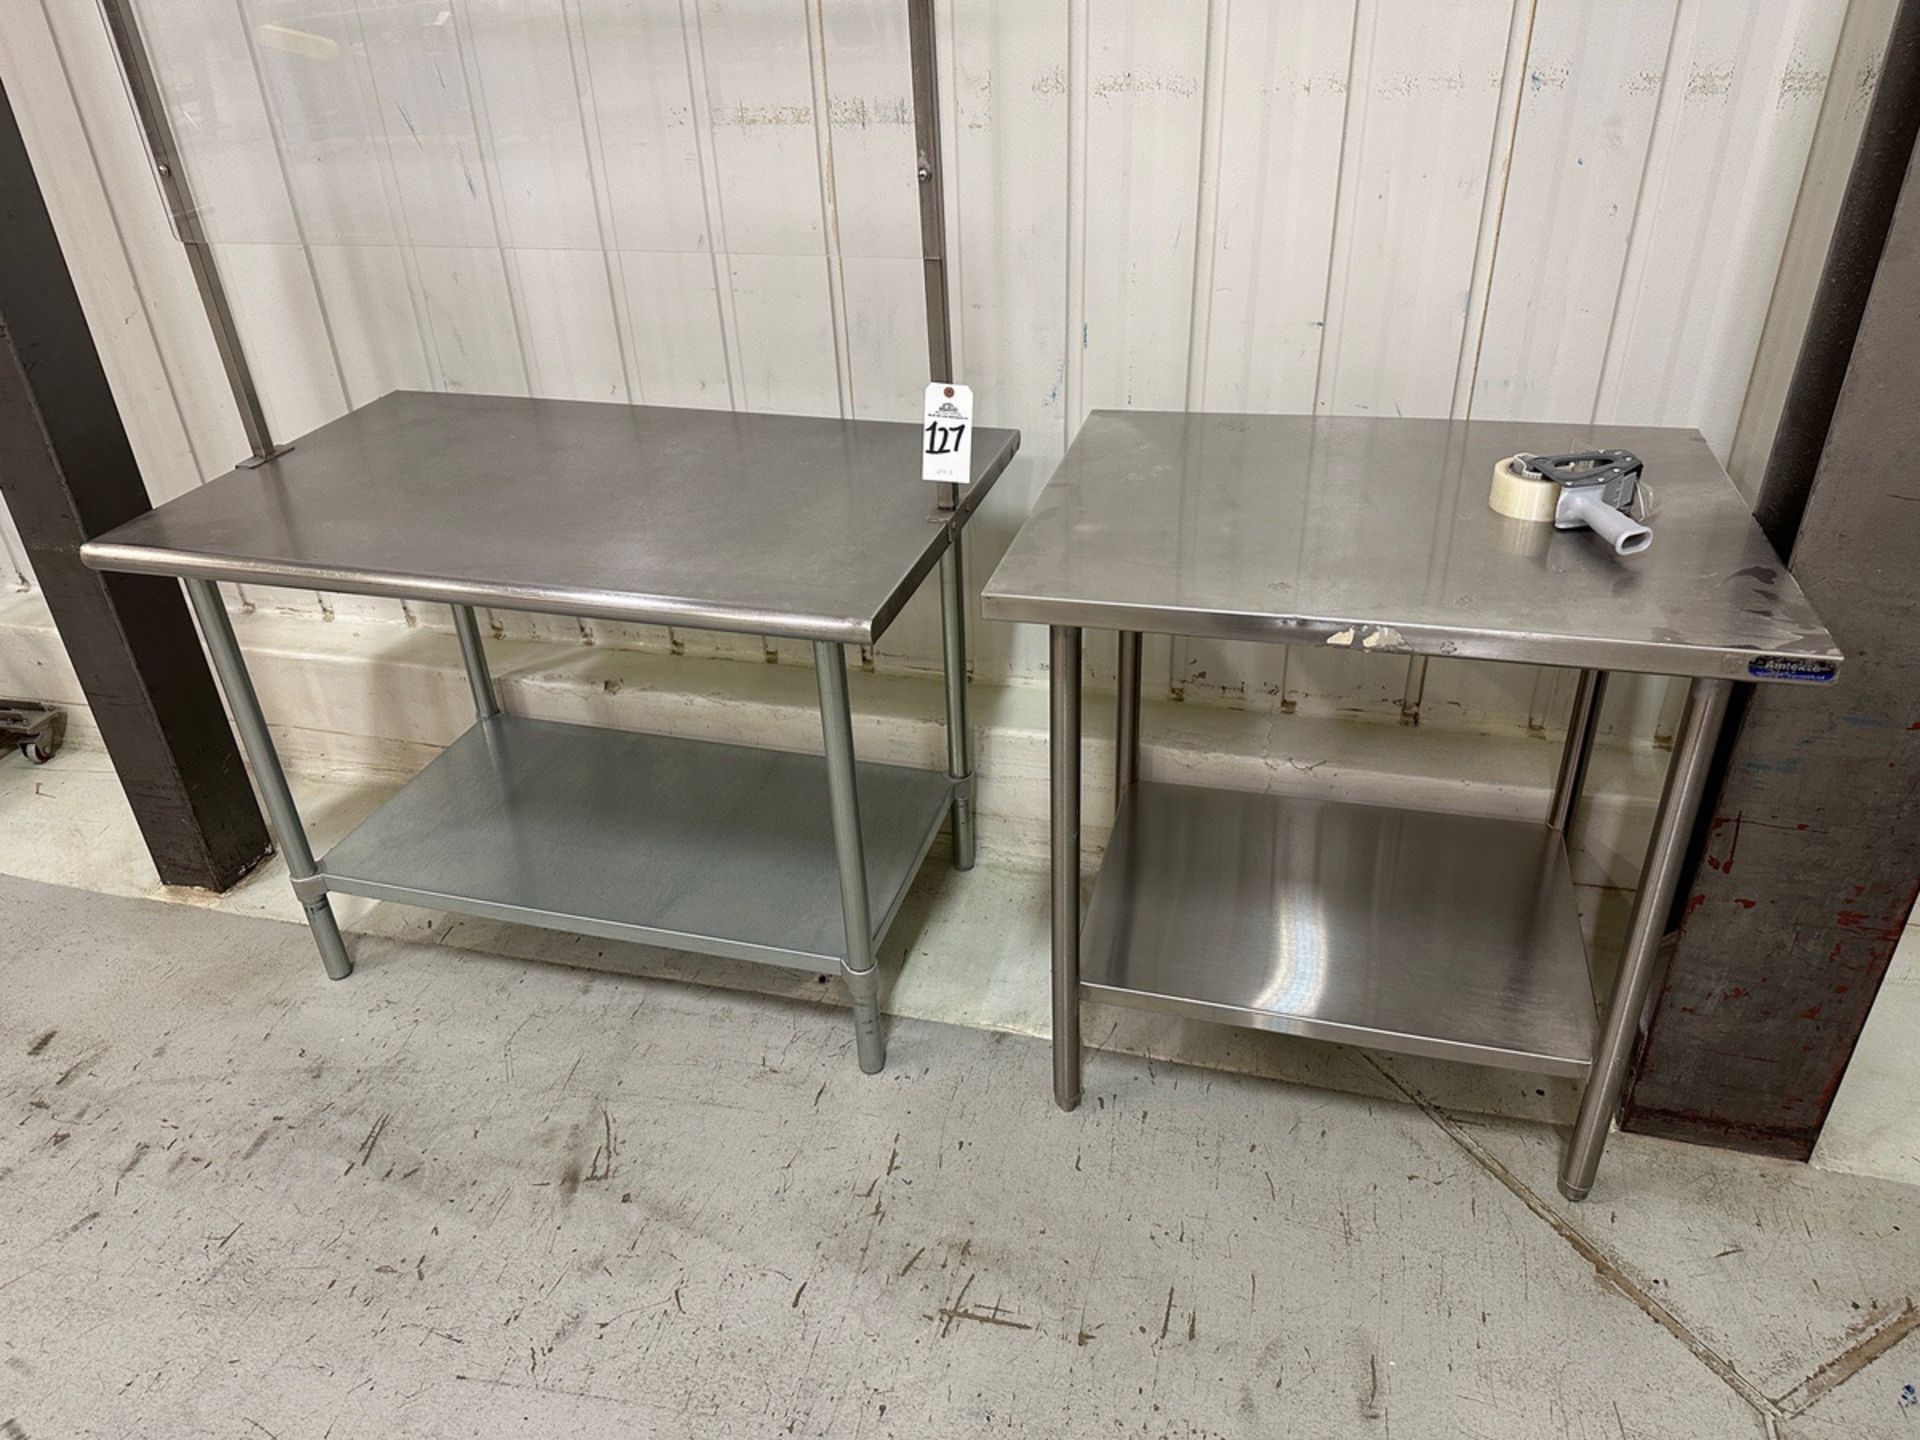 Lot of (2) Stainless Steel Tables - (1) 30" x 3' and (1) 30" x 4' | Rig Fee $50